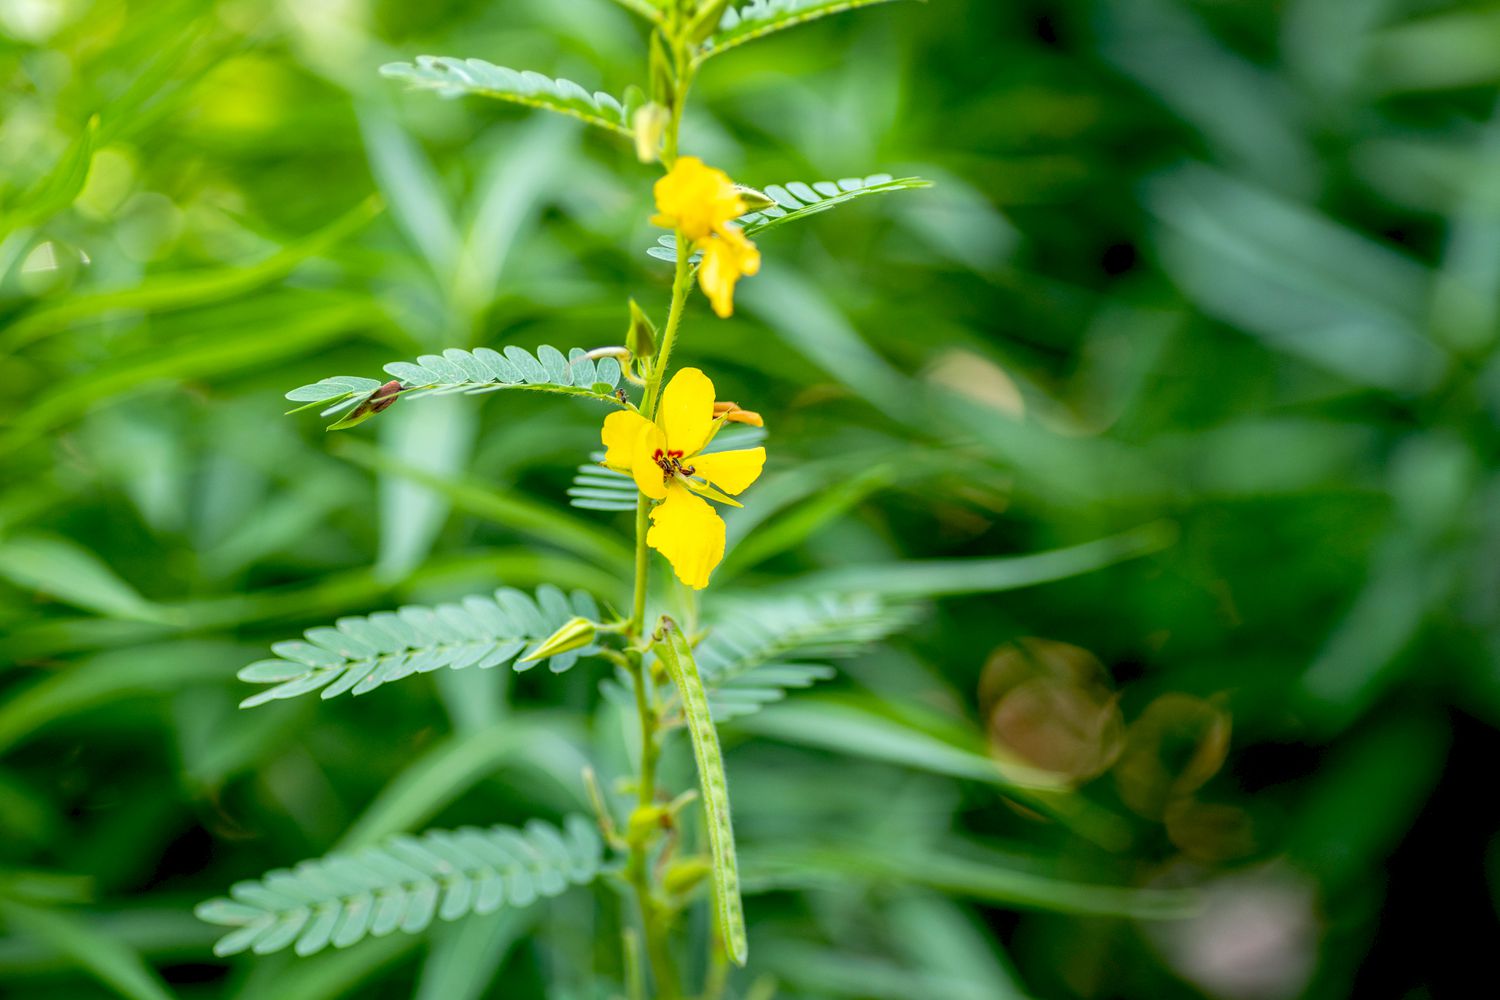 Partridge pea plant with small feathery leaves and yellow flowers closeup